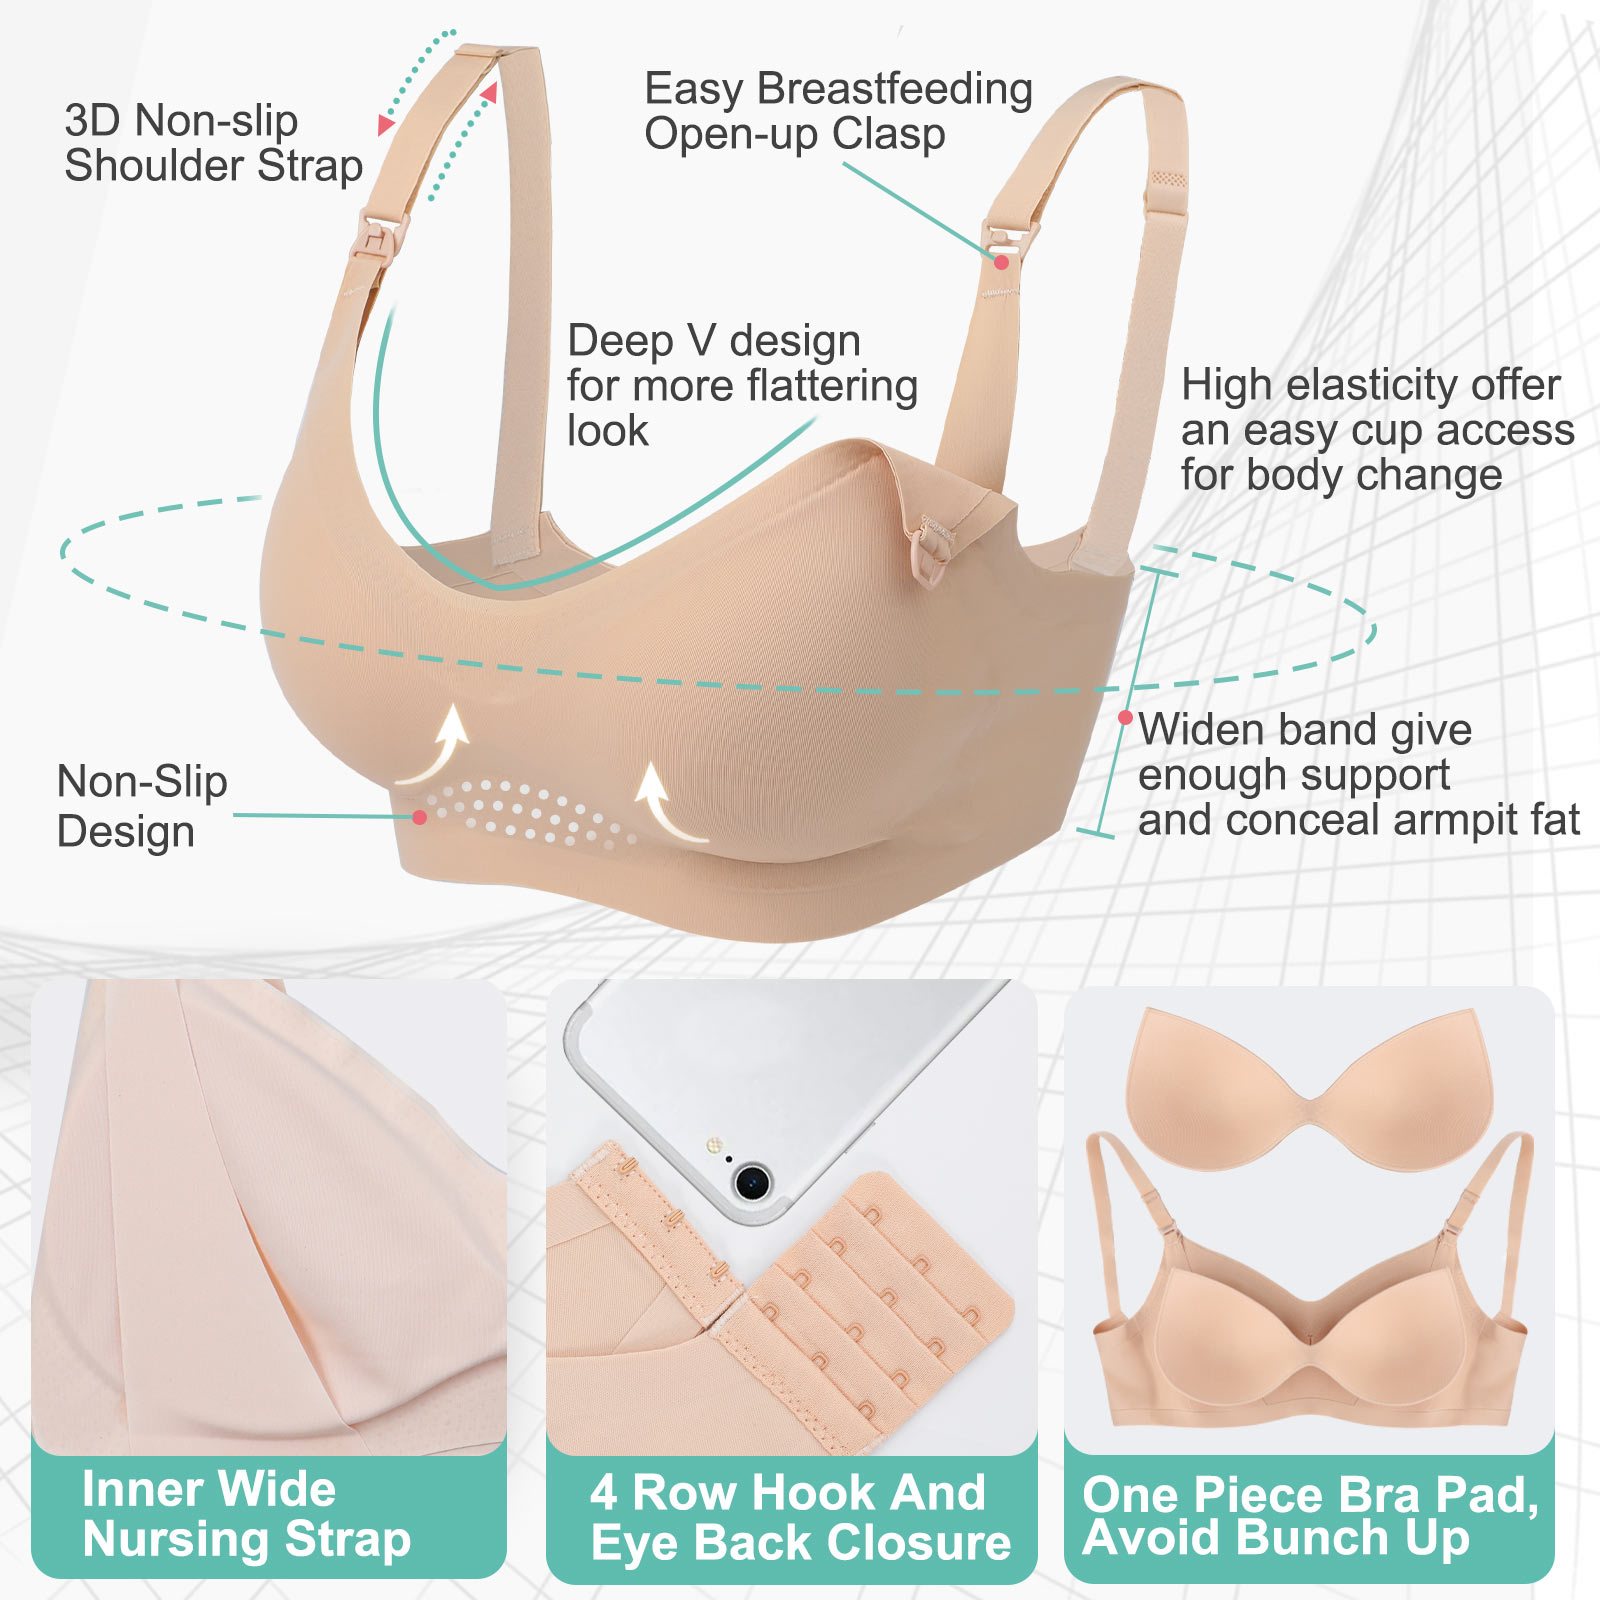 What to Consider When Buying a Push Up Nursing Bra